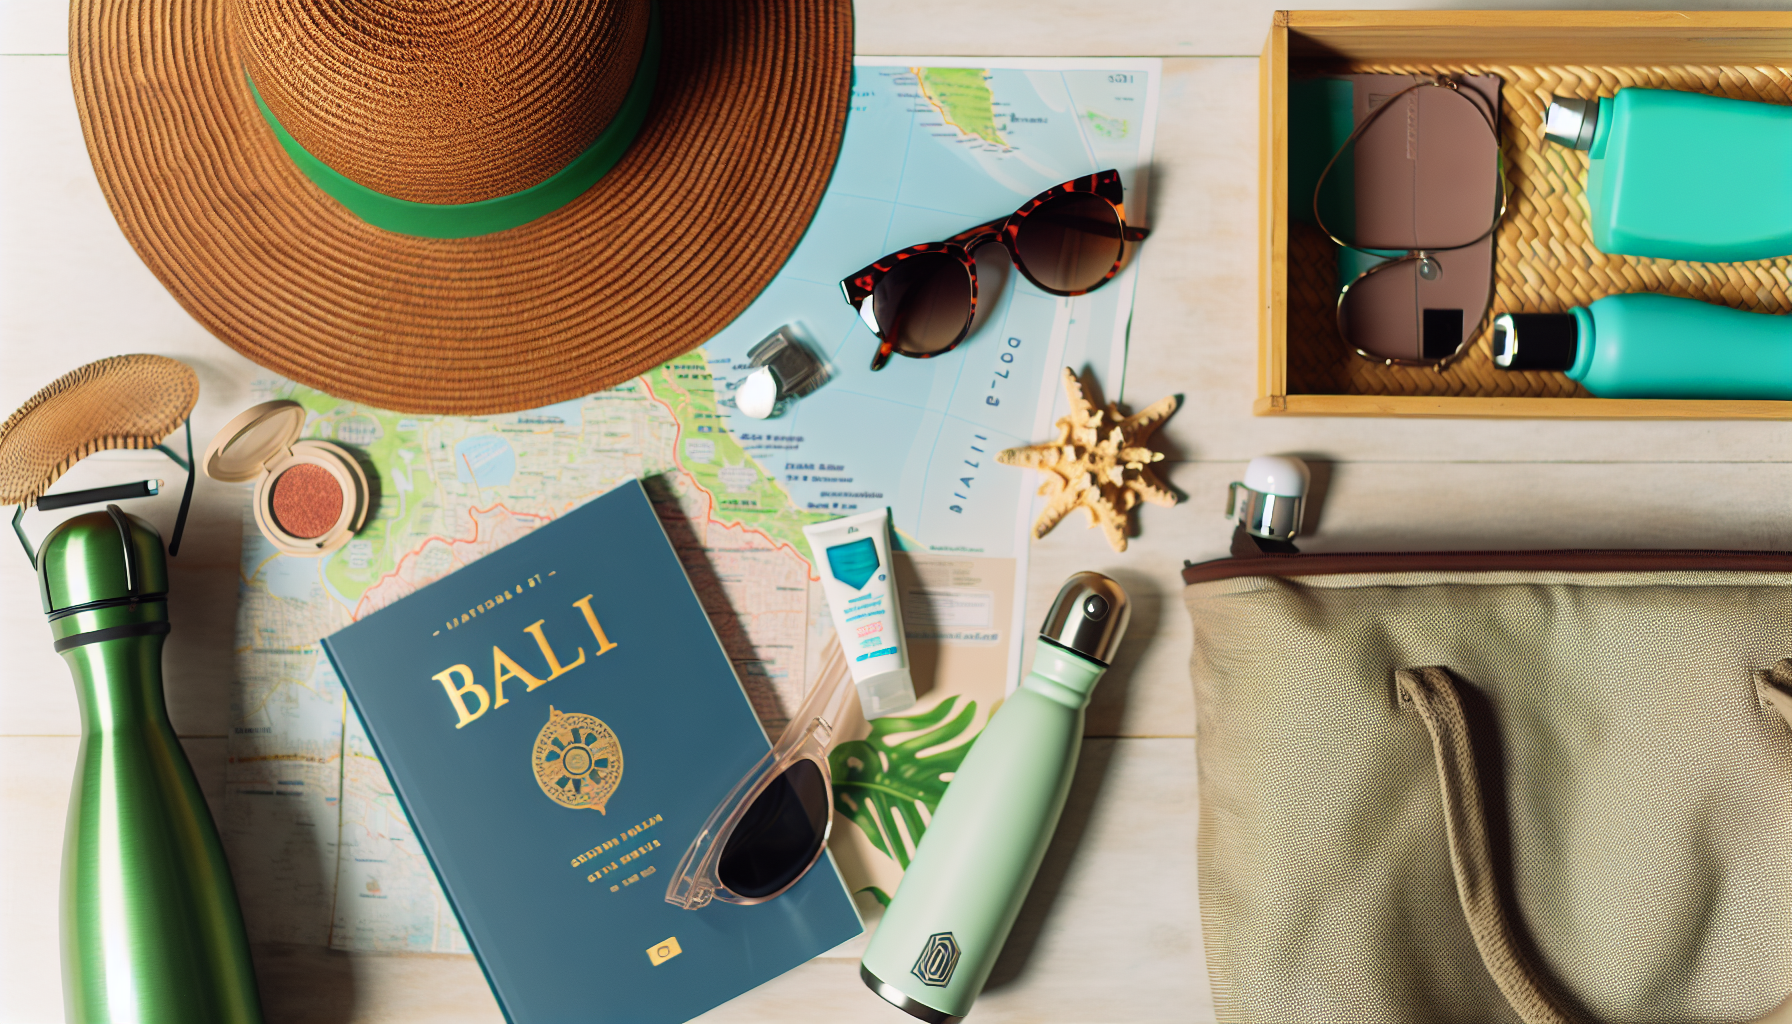 Travel essentials for a trip to Bali